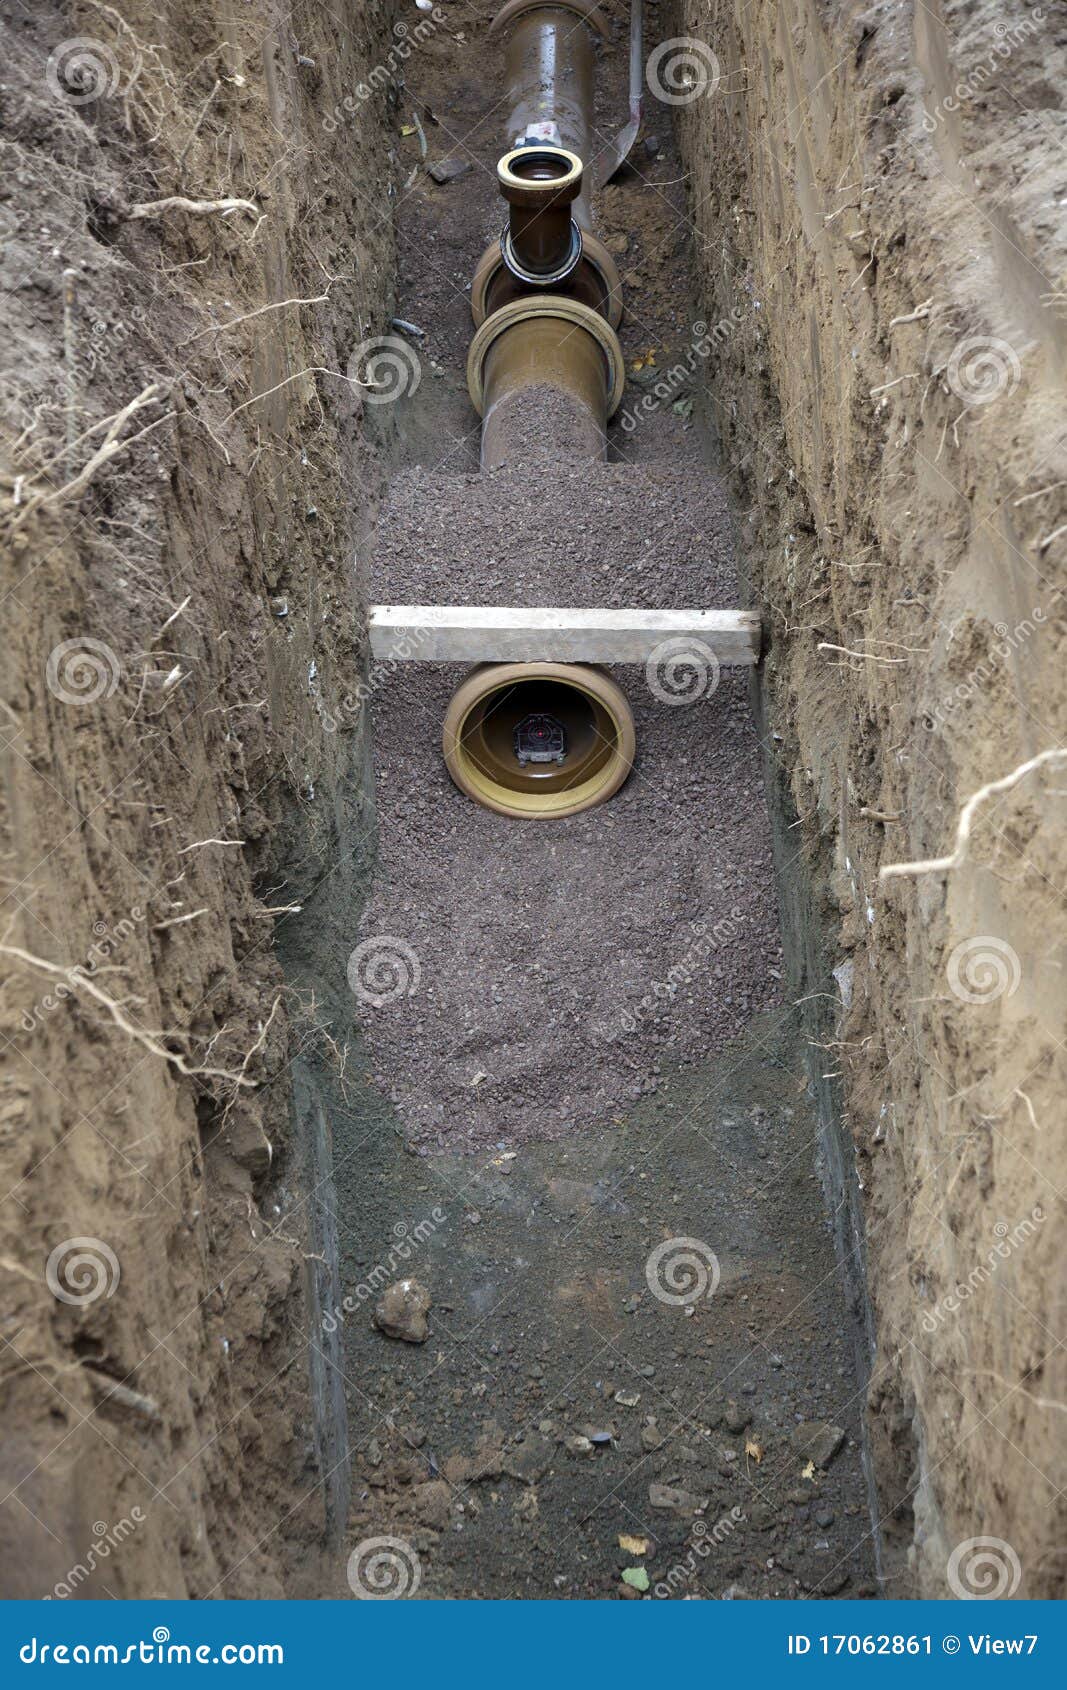 water pipes in ditch